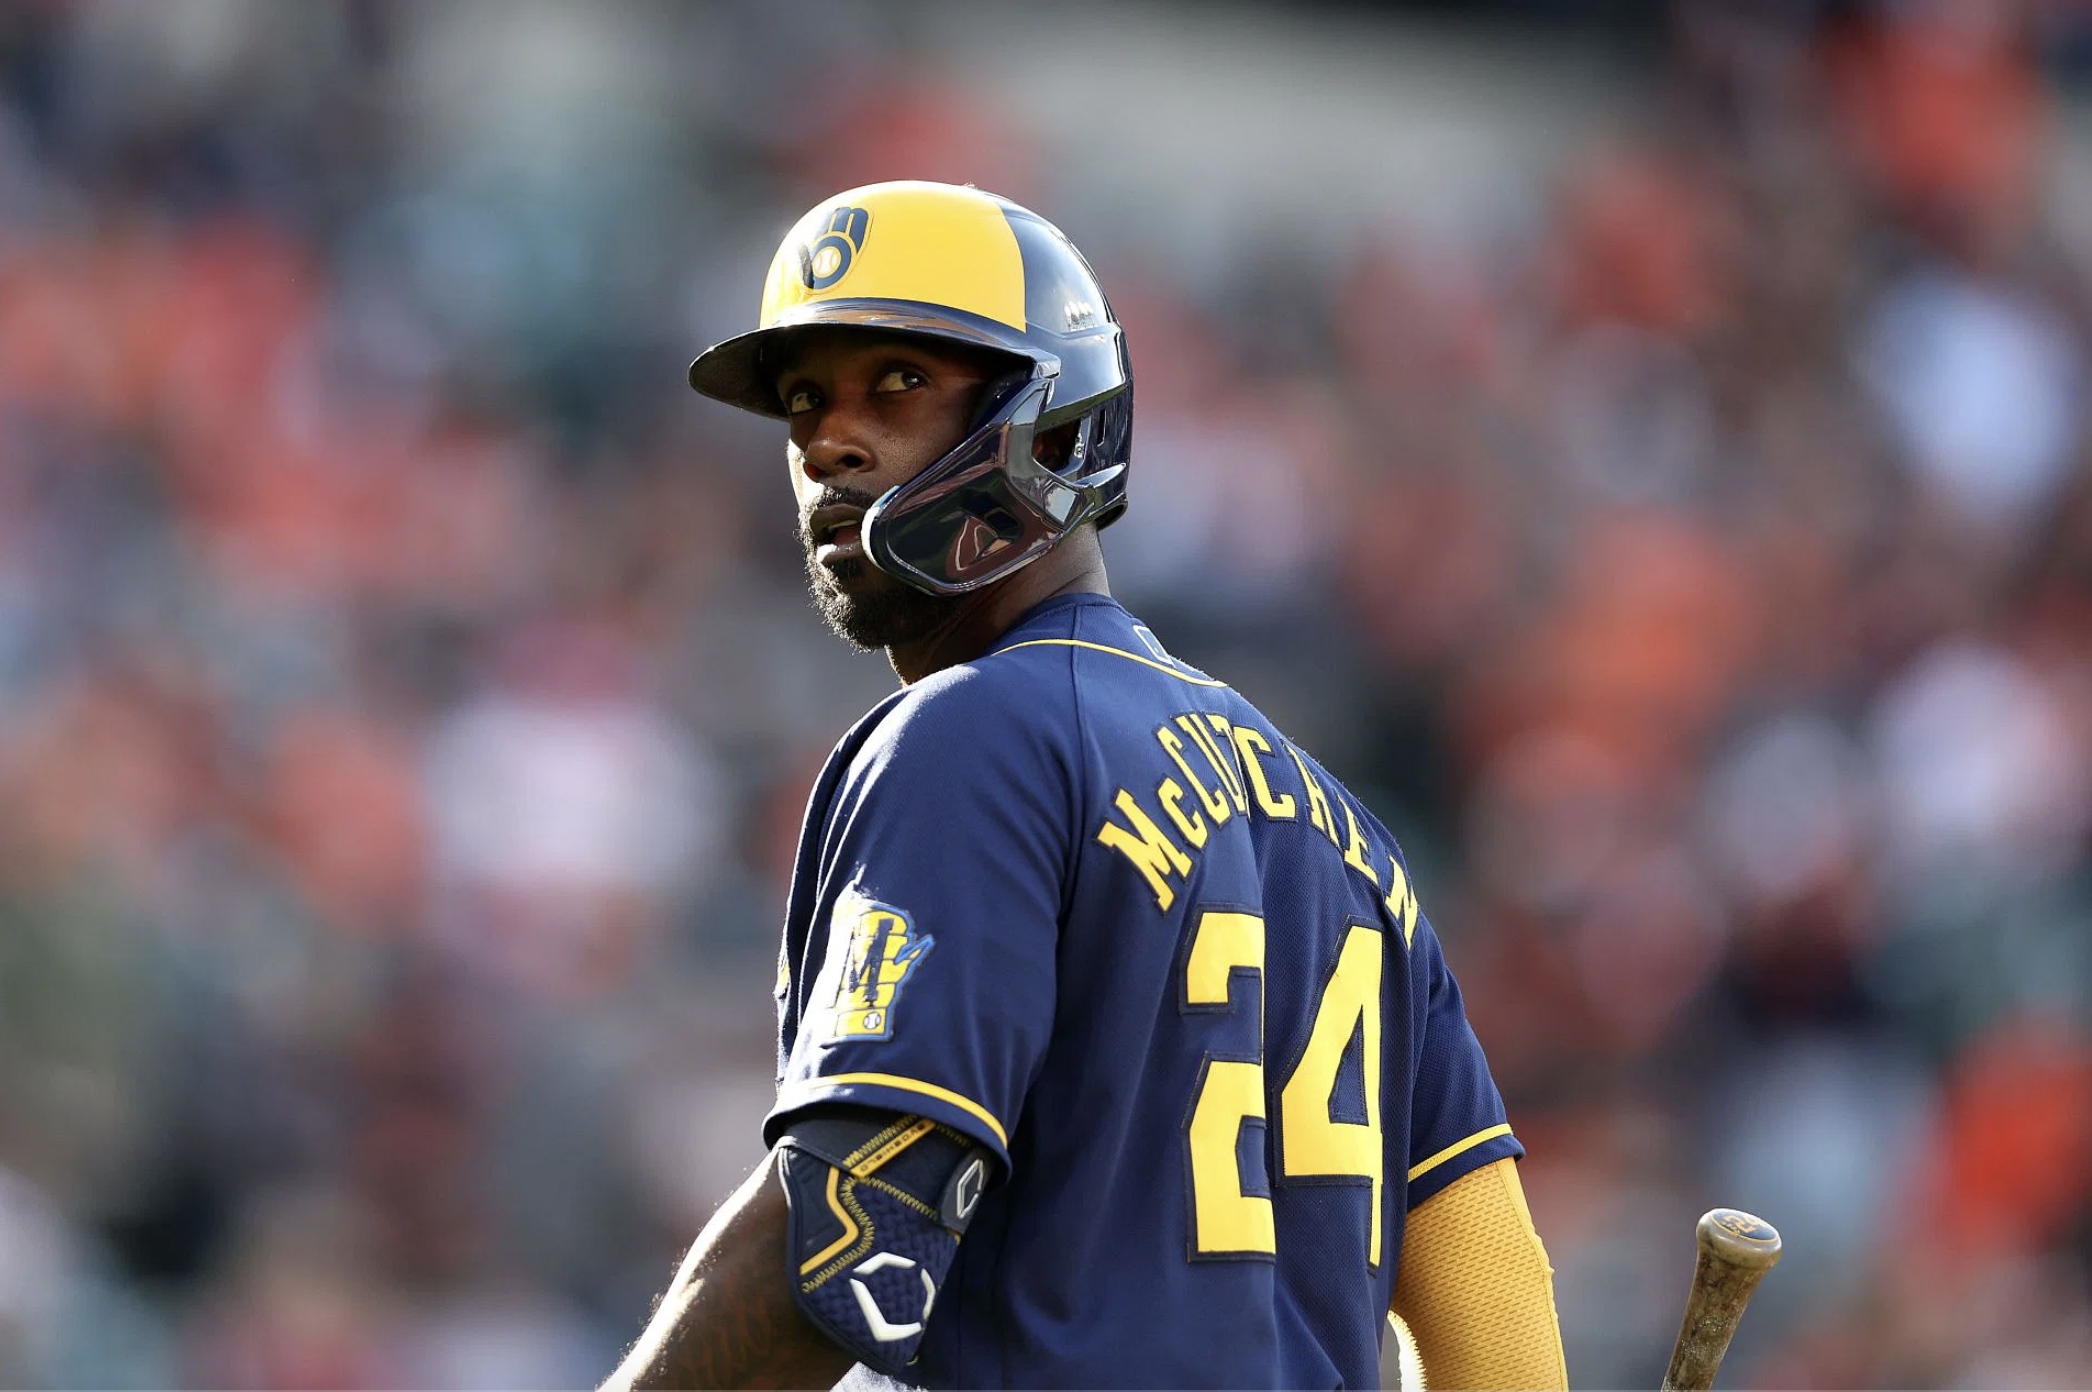 Christian Yelich, Andrew McCutchen on Brewers' game -winning rally